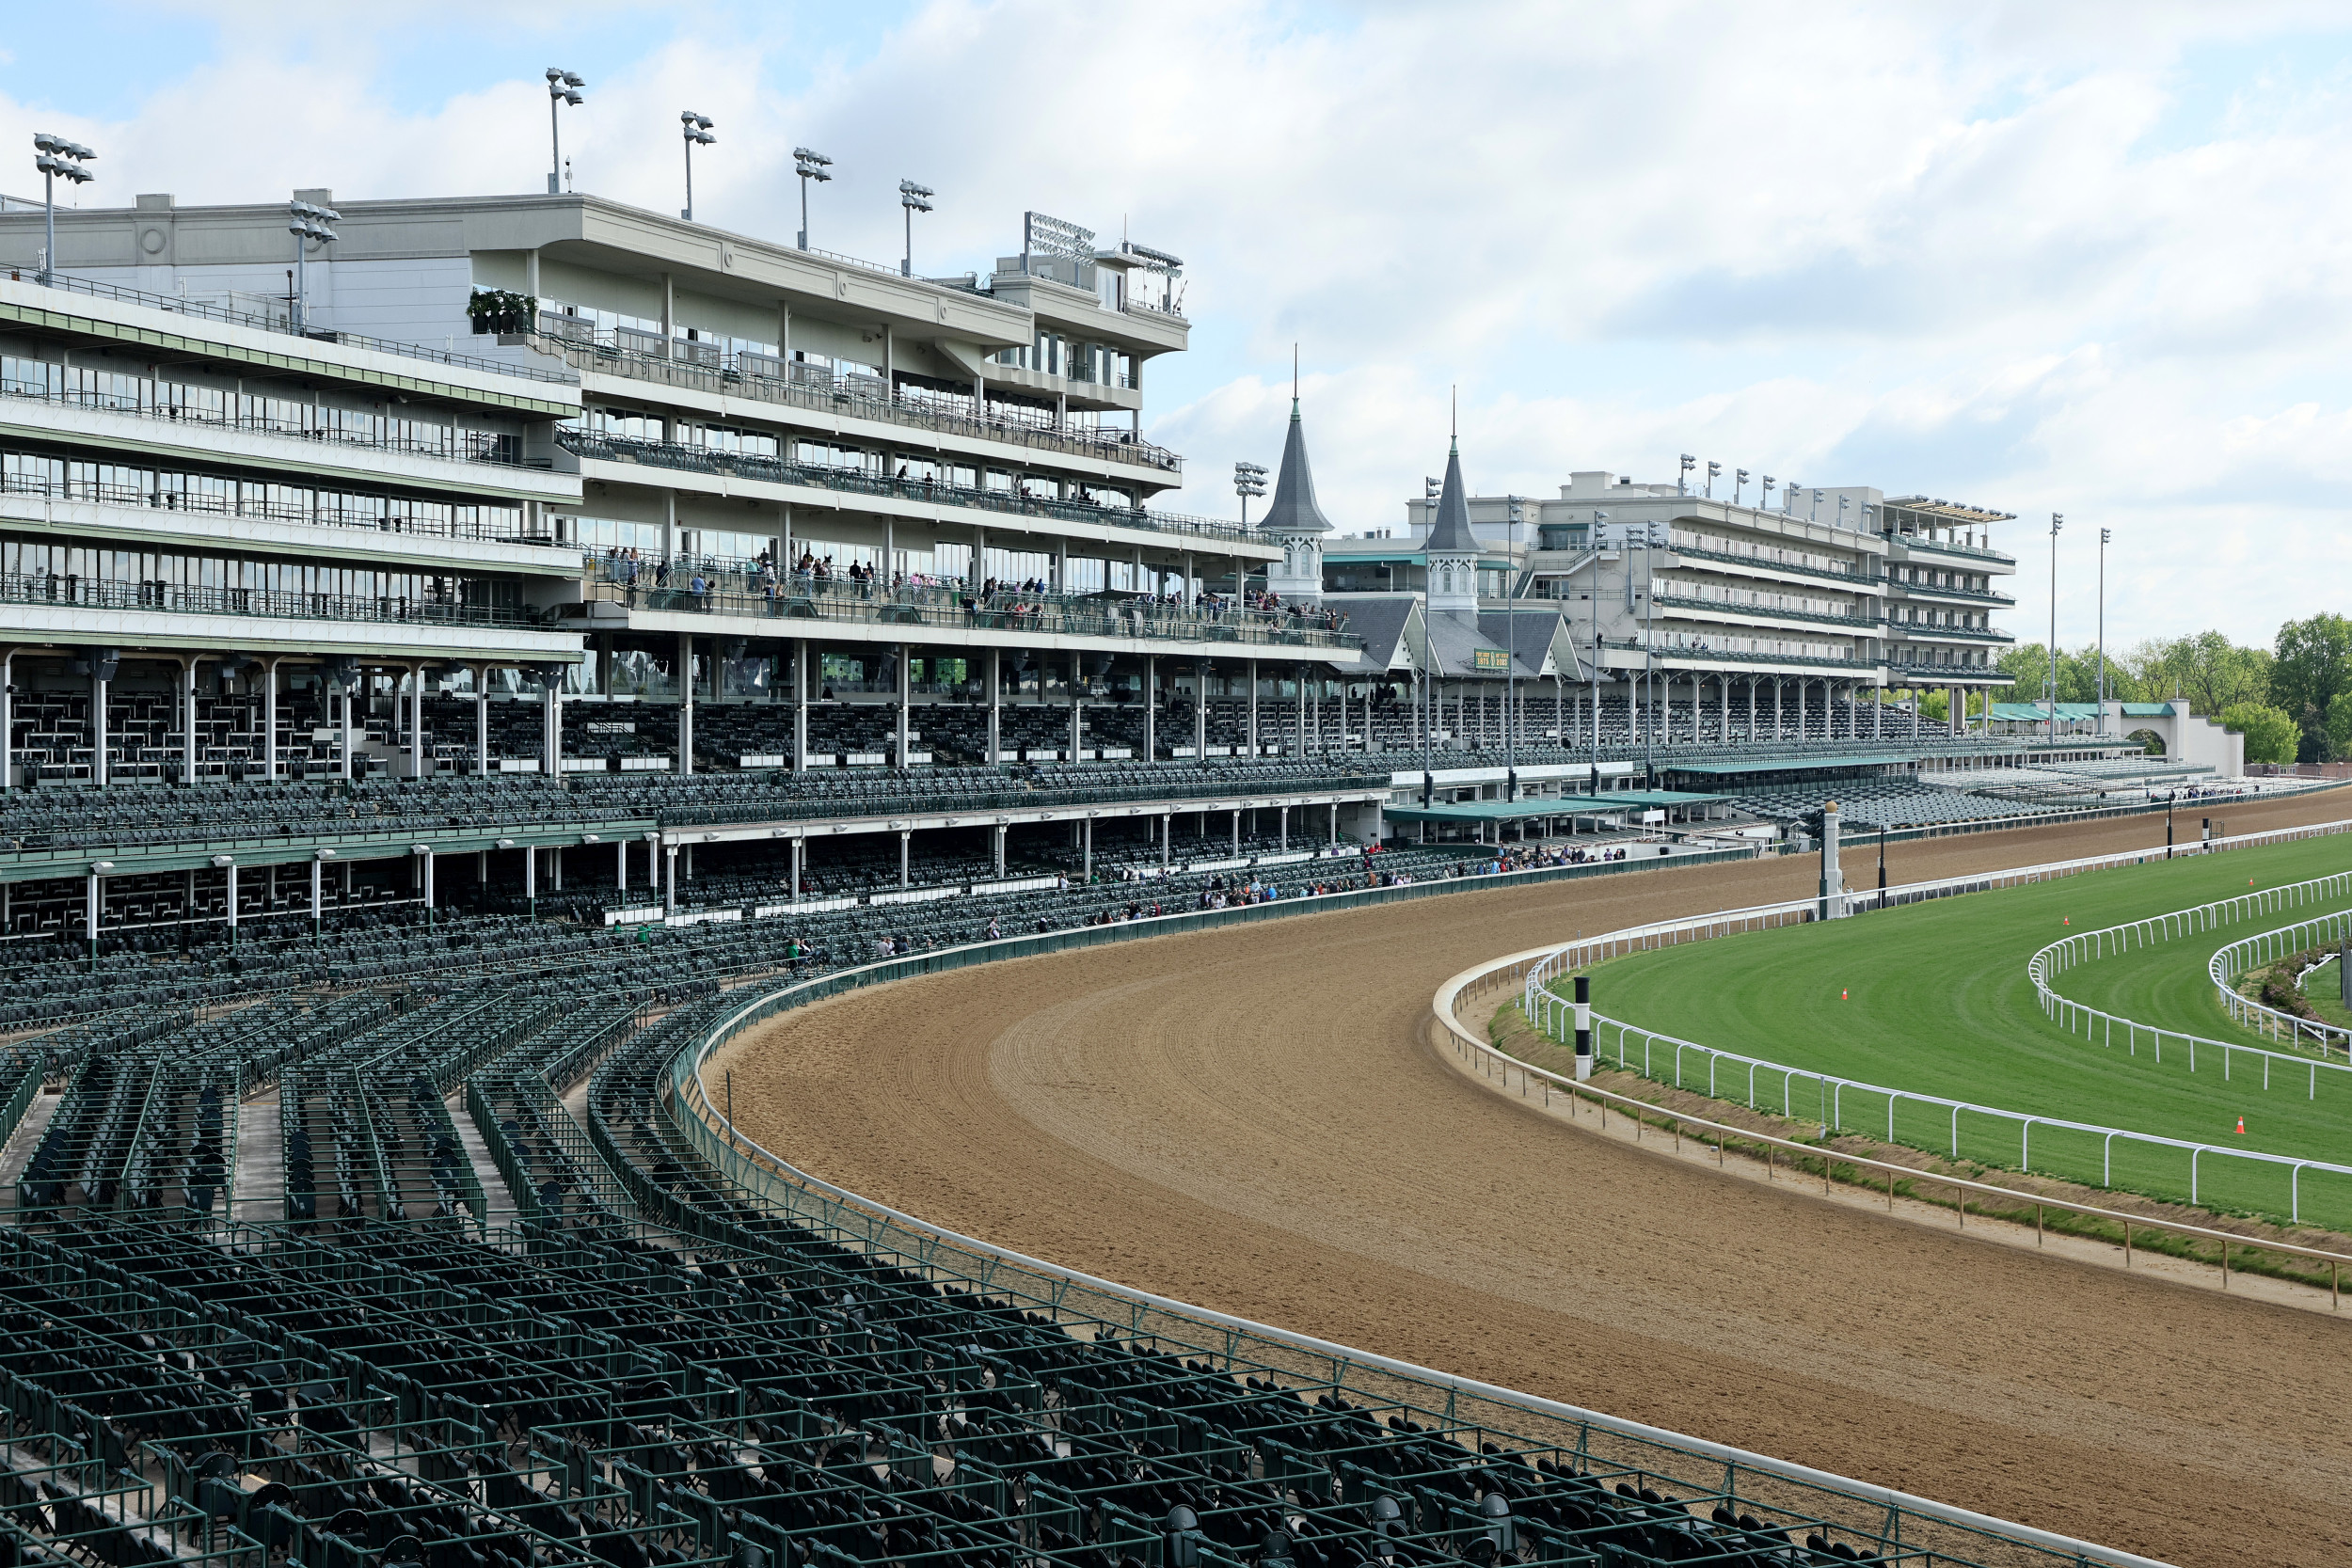 Kentucky Derby LeadUp Marred by 'Unacceptable' Horse Deaths